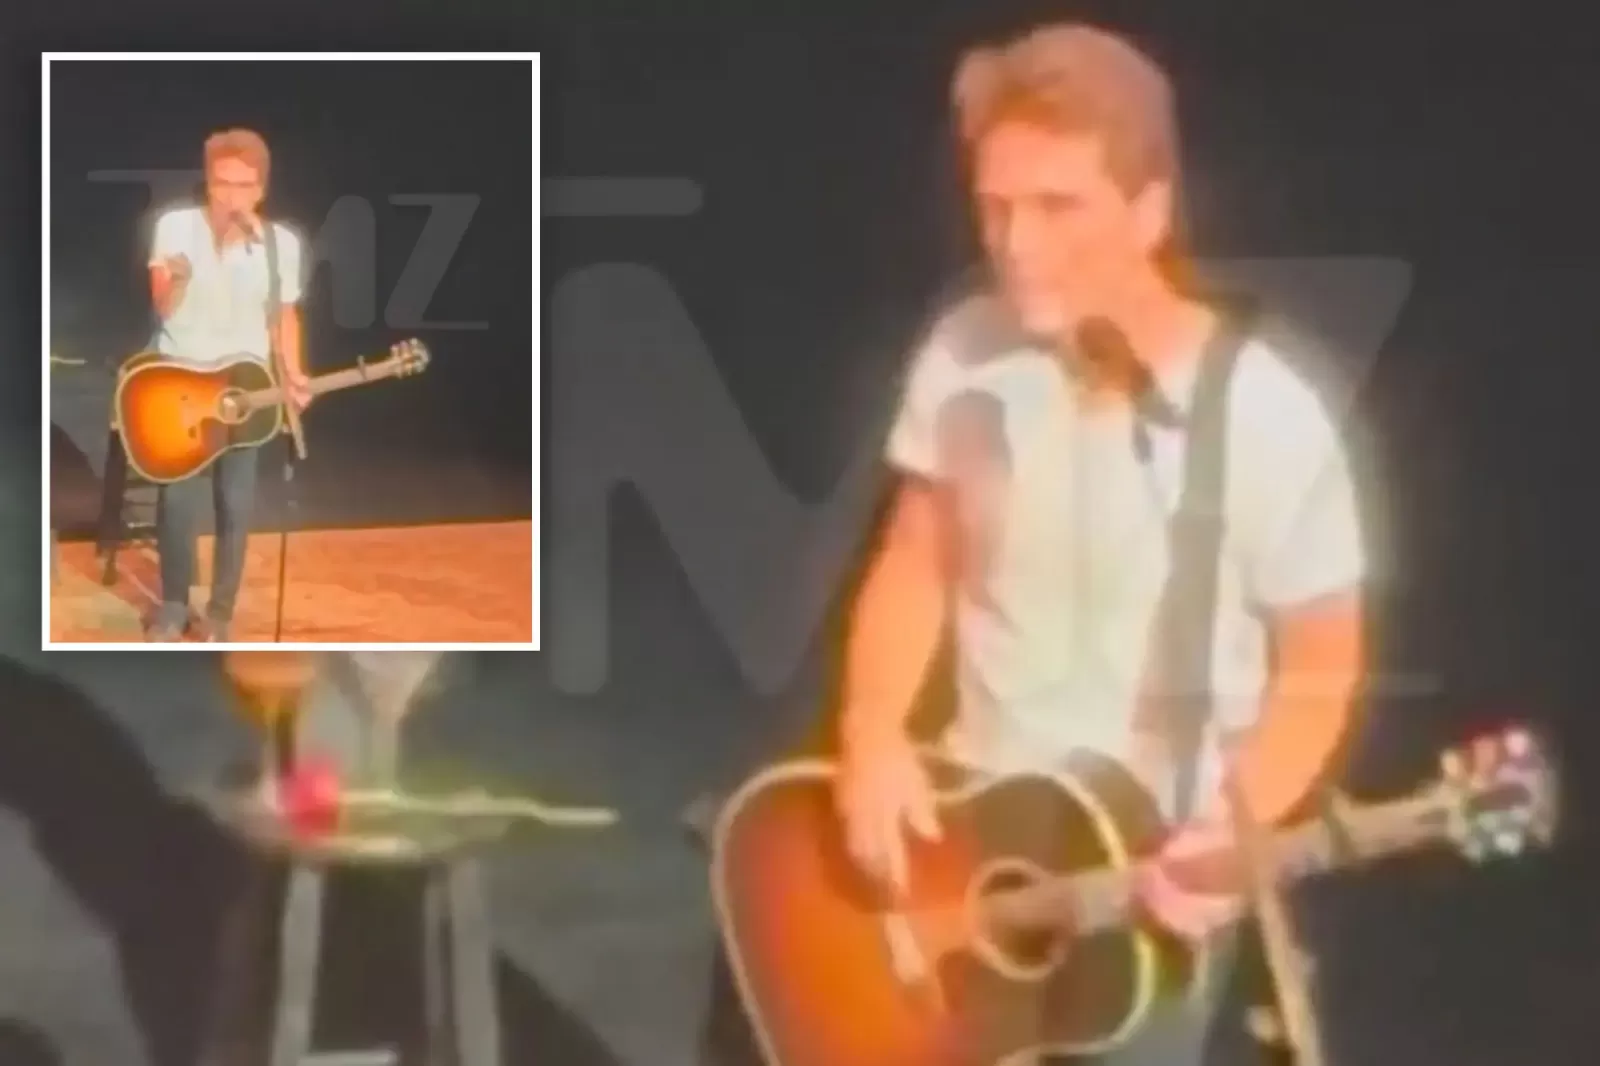 VIDEO CLIP Richard Marx tears into obnoxious fan during concert: ‘Learn some fucking manners’